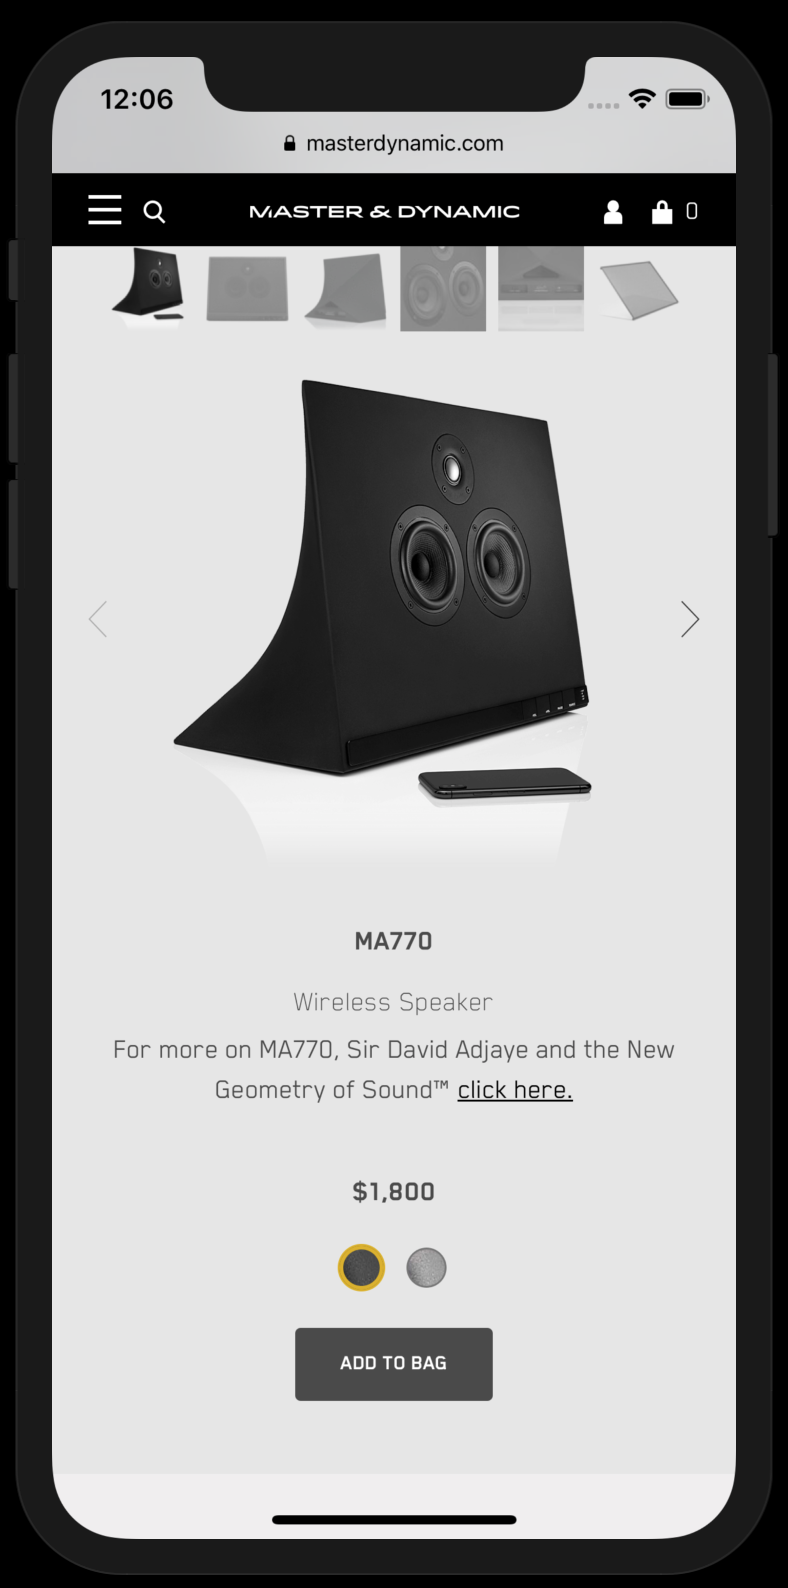 mobile device m&d_mobile2.png